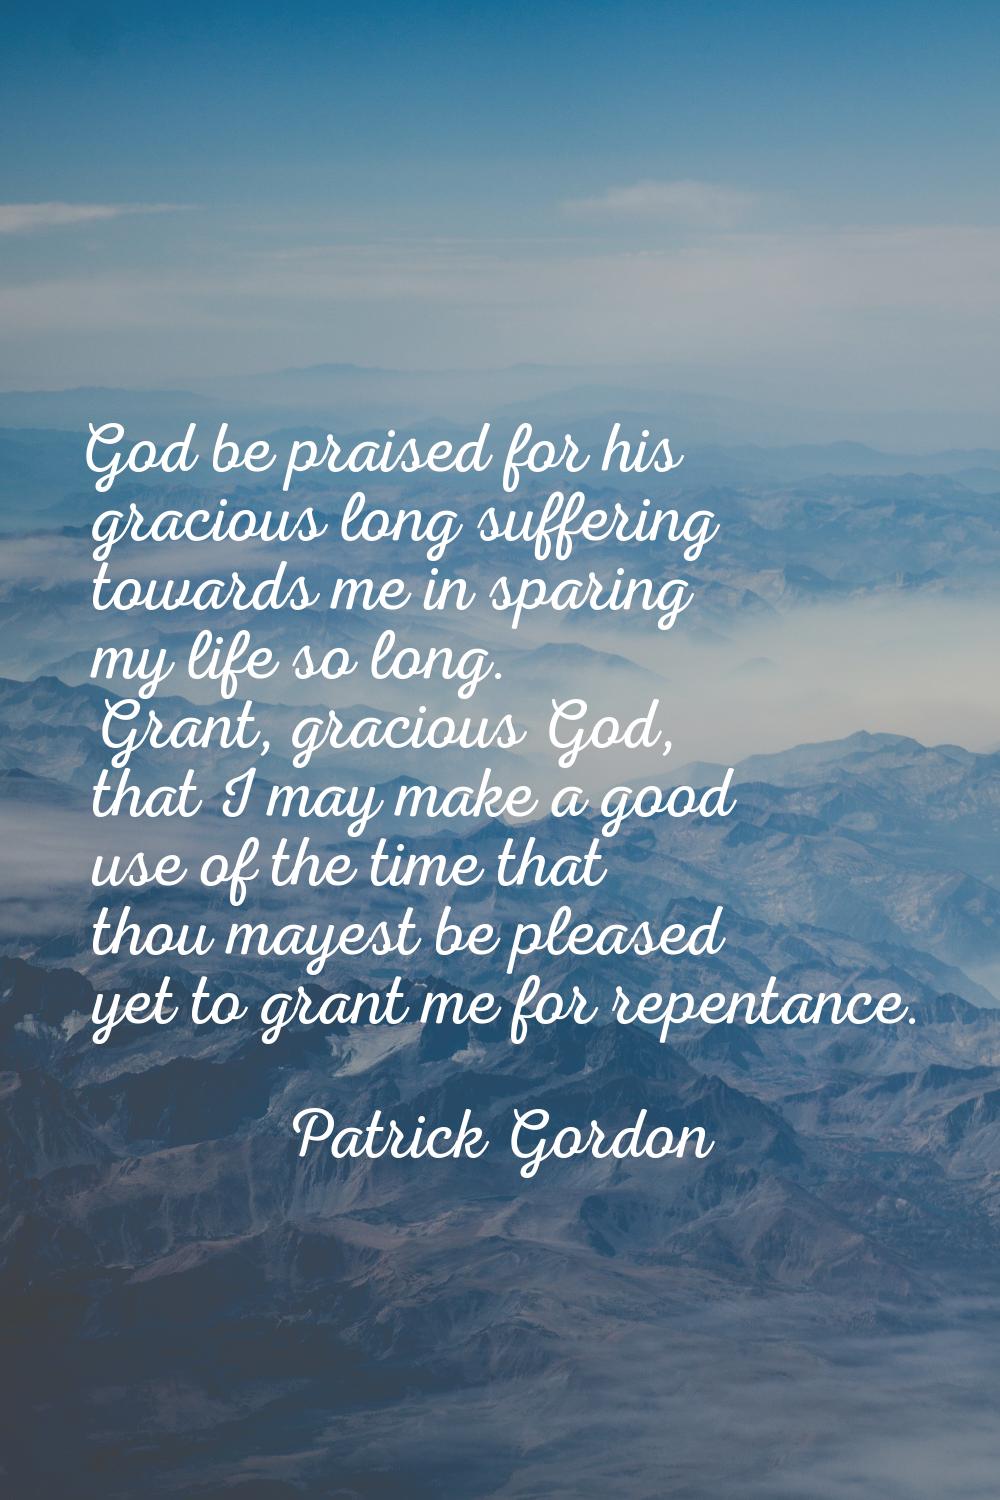 God be praised for his gracious long suffering towards me in sparing my life so long. Grant, gracio